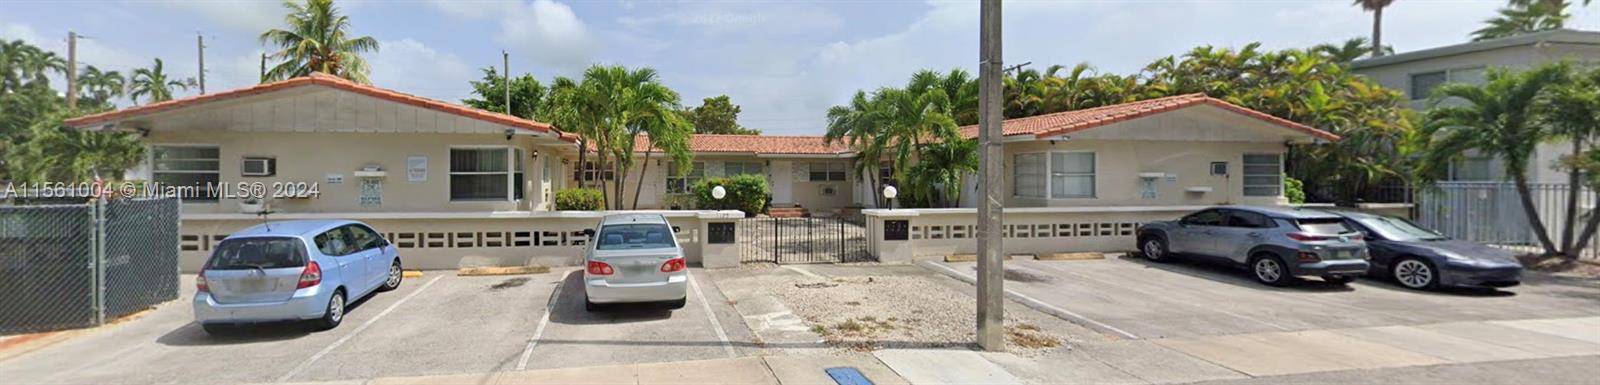 Fully updated and well maintained 8 unit property on large 12, 516 SF lot located in east Shorecrest Unit breakdown 2 2 1 units, 4 1 1 units, 2 studios ...